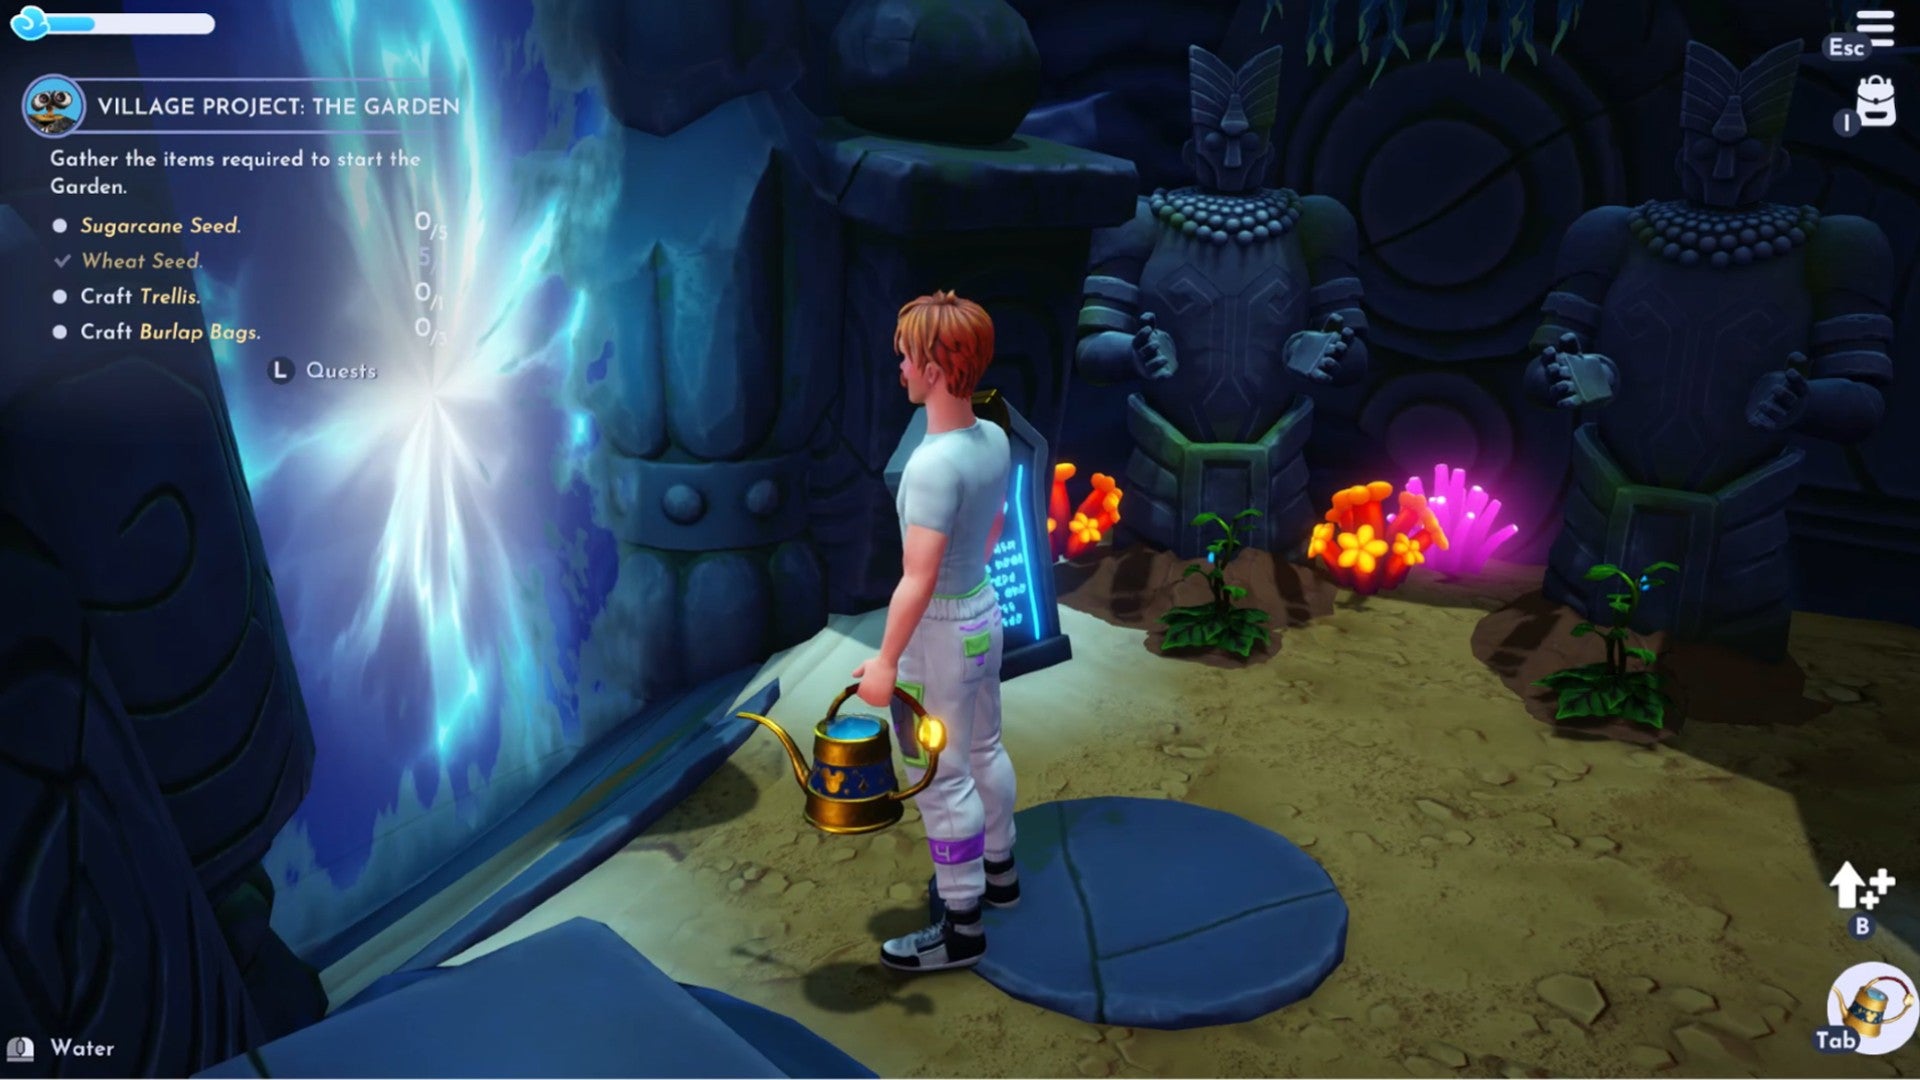 Disney Dreamlight Valley screenshot showing the player staring at a blue magical barrier in a dark cave. The floor is sandy, and there are crops growing in the background.